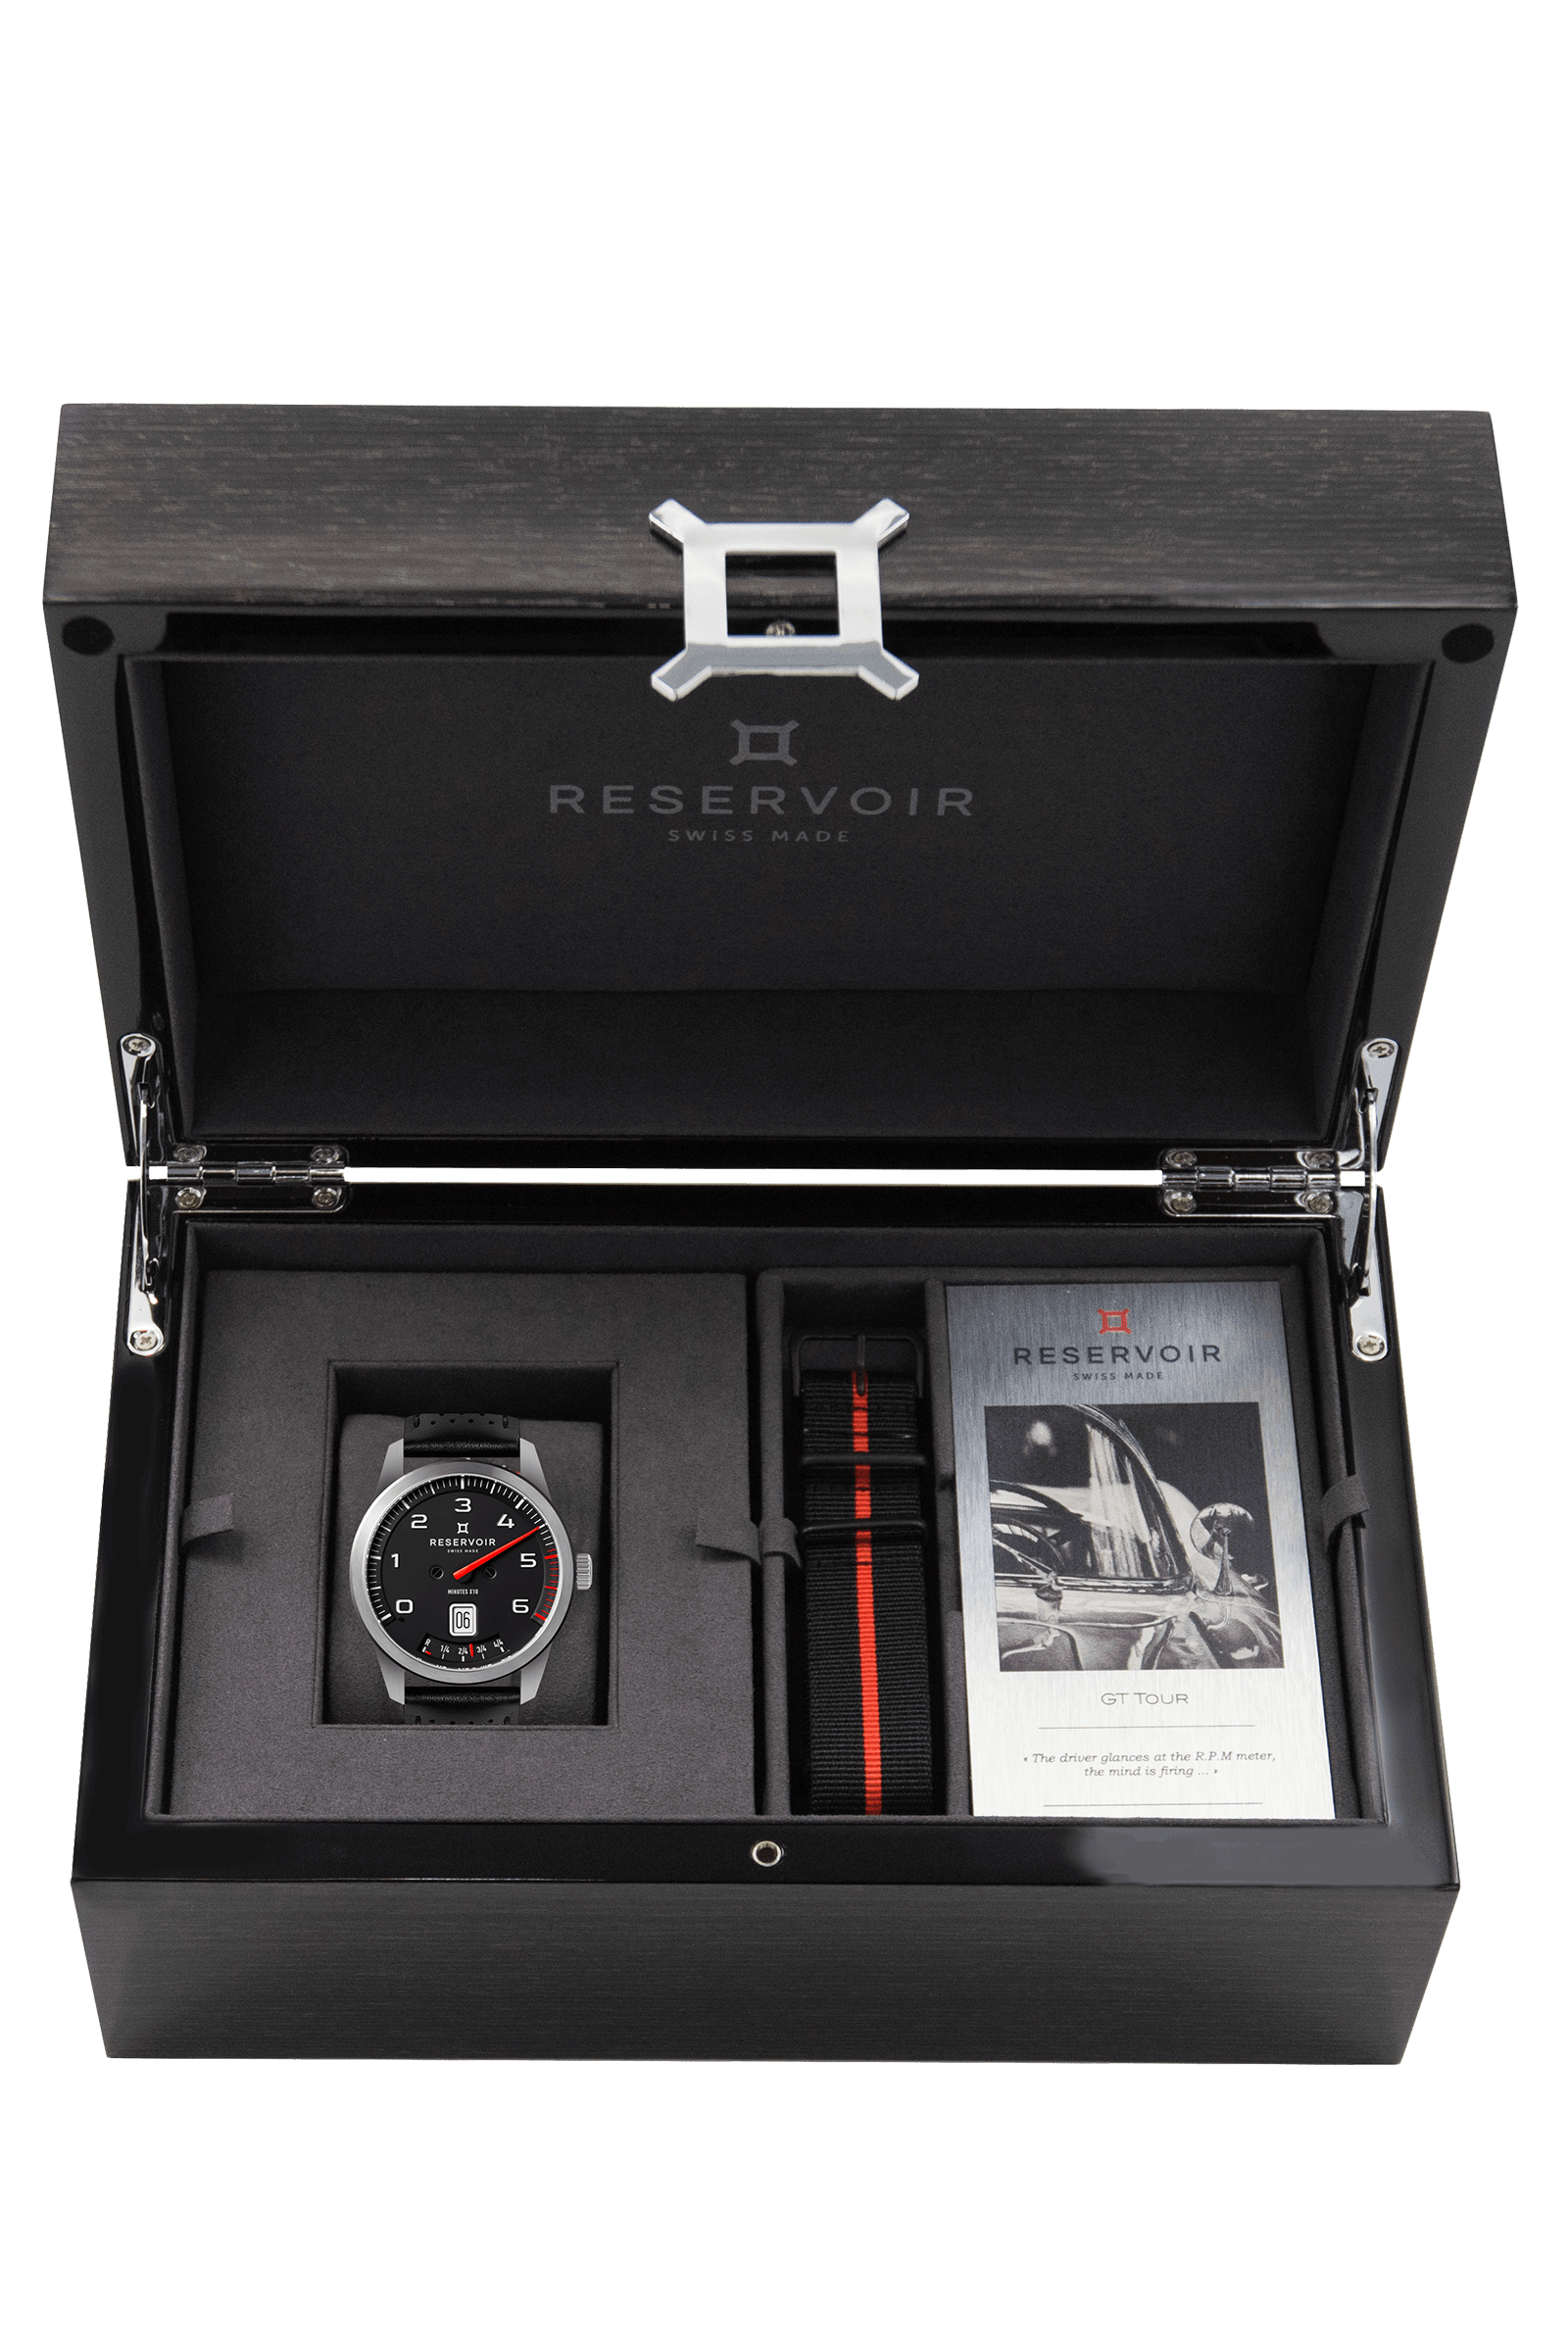 Media editorial of a luxury RESERVOIR watch featuring dark charcoal, light grey, and medium grey colors.